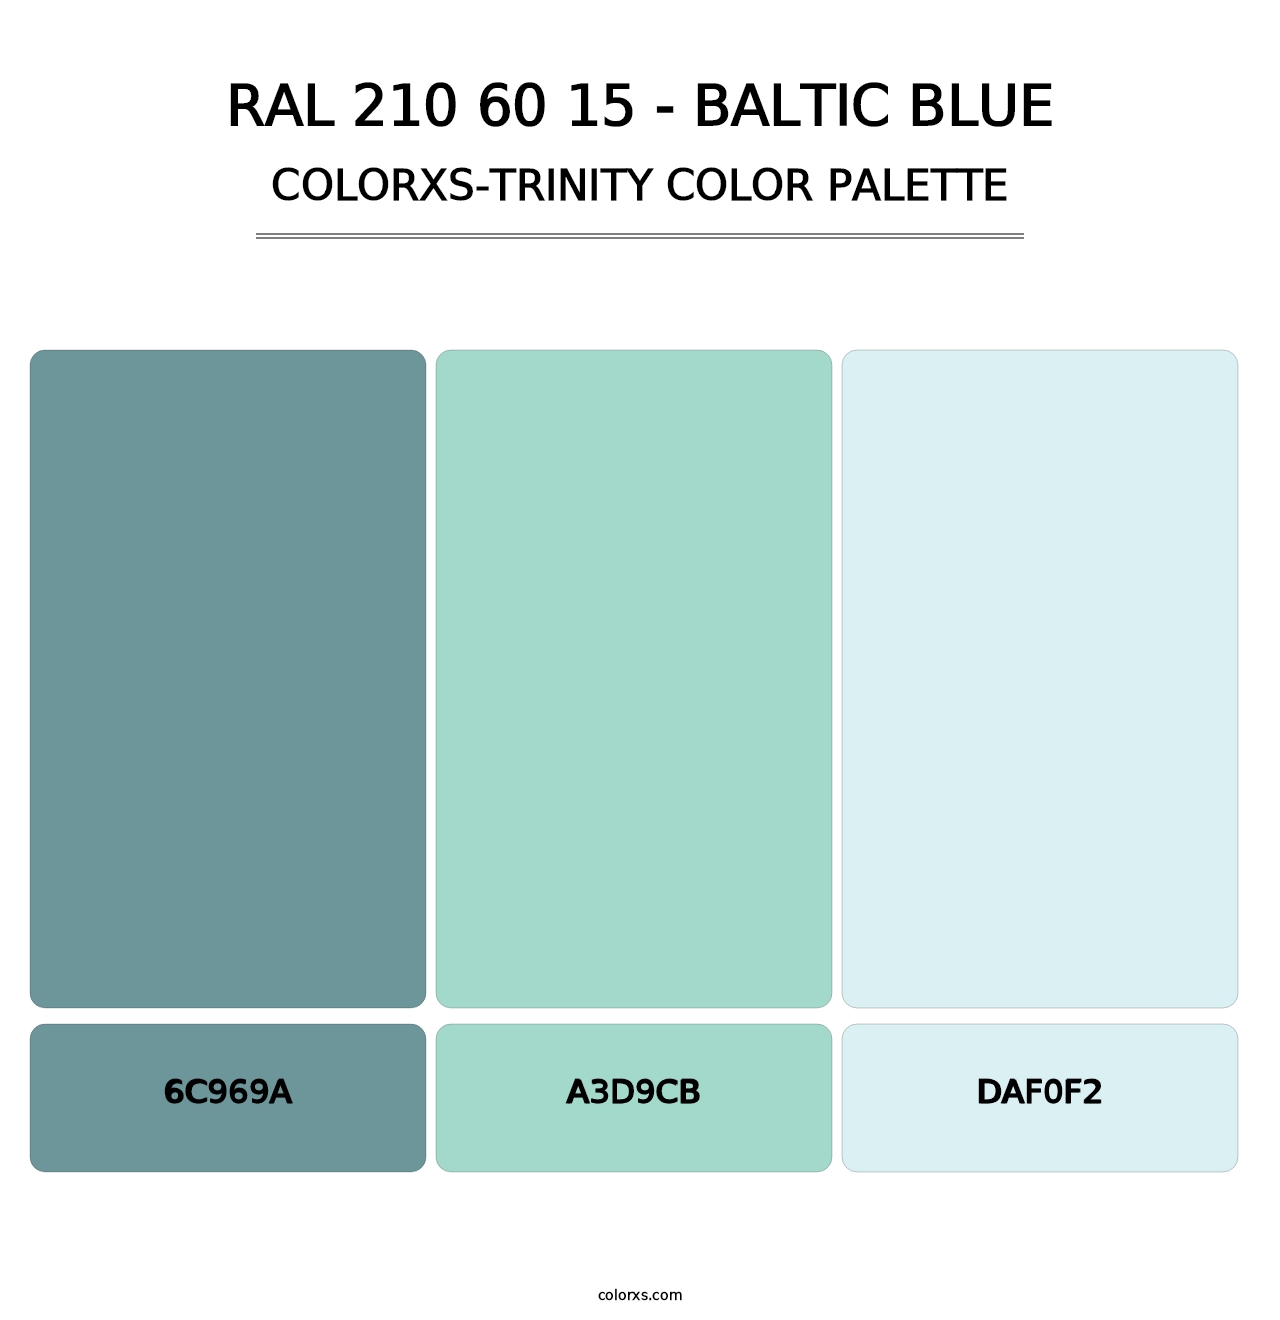 RAL 210 60 15 - Baltic Blue - Colorxs Trinity Palette